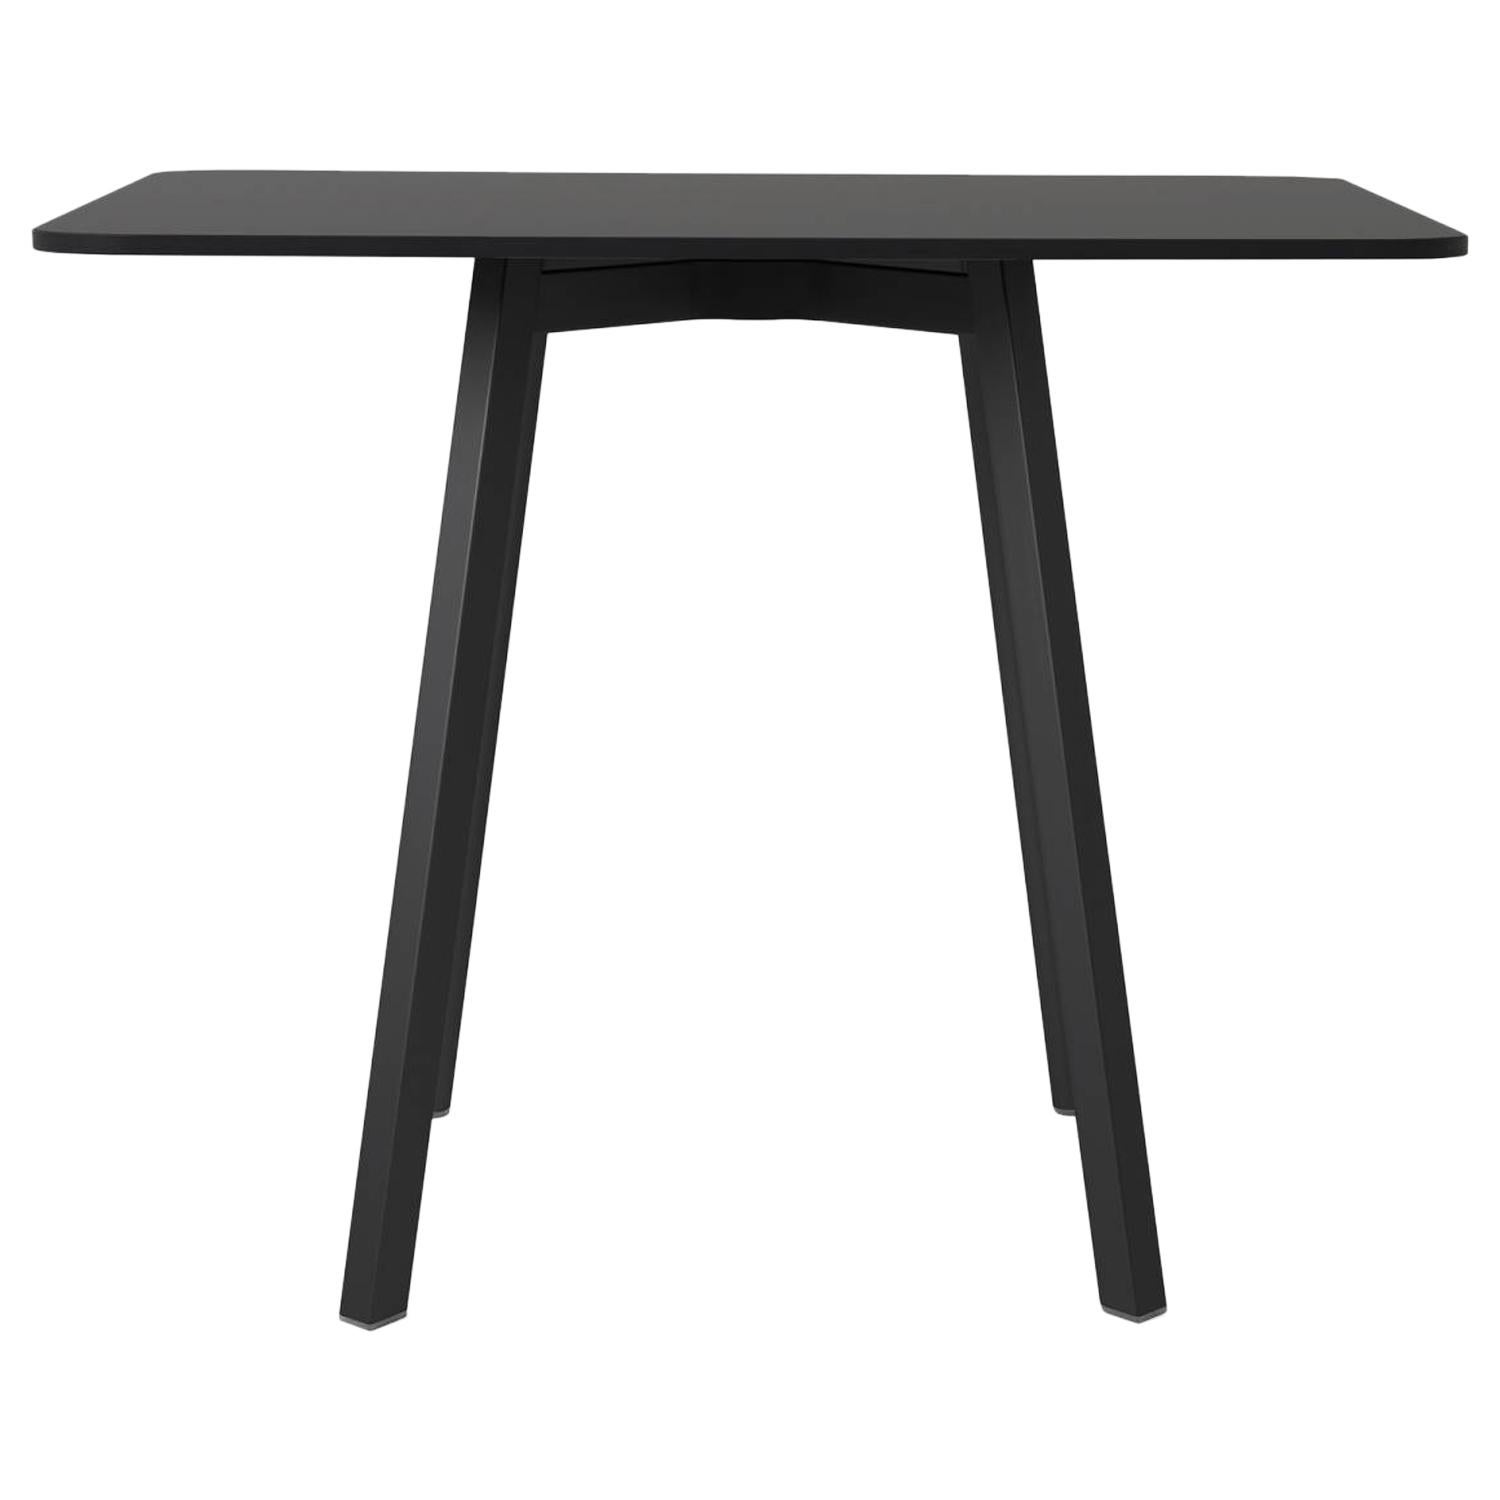 Emeco Su Large Cafe Table in Black Aluminum w/ Black Laminate Top by Nendo